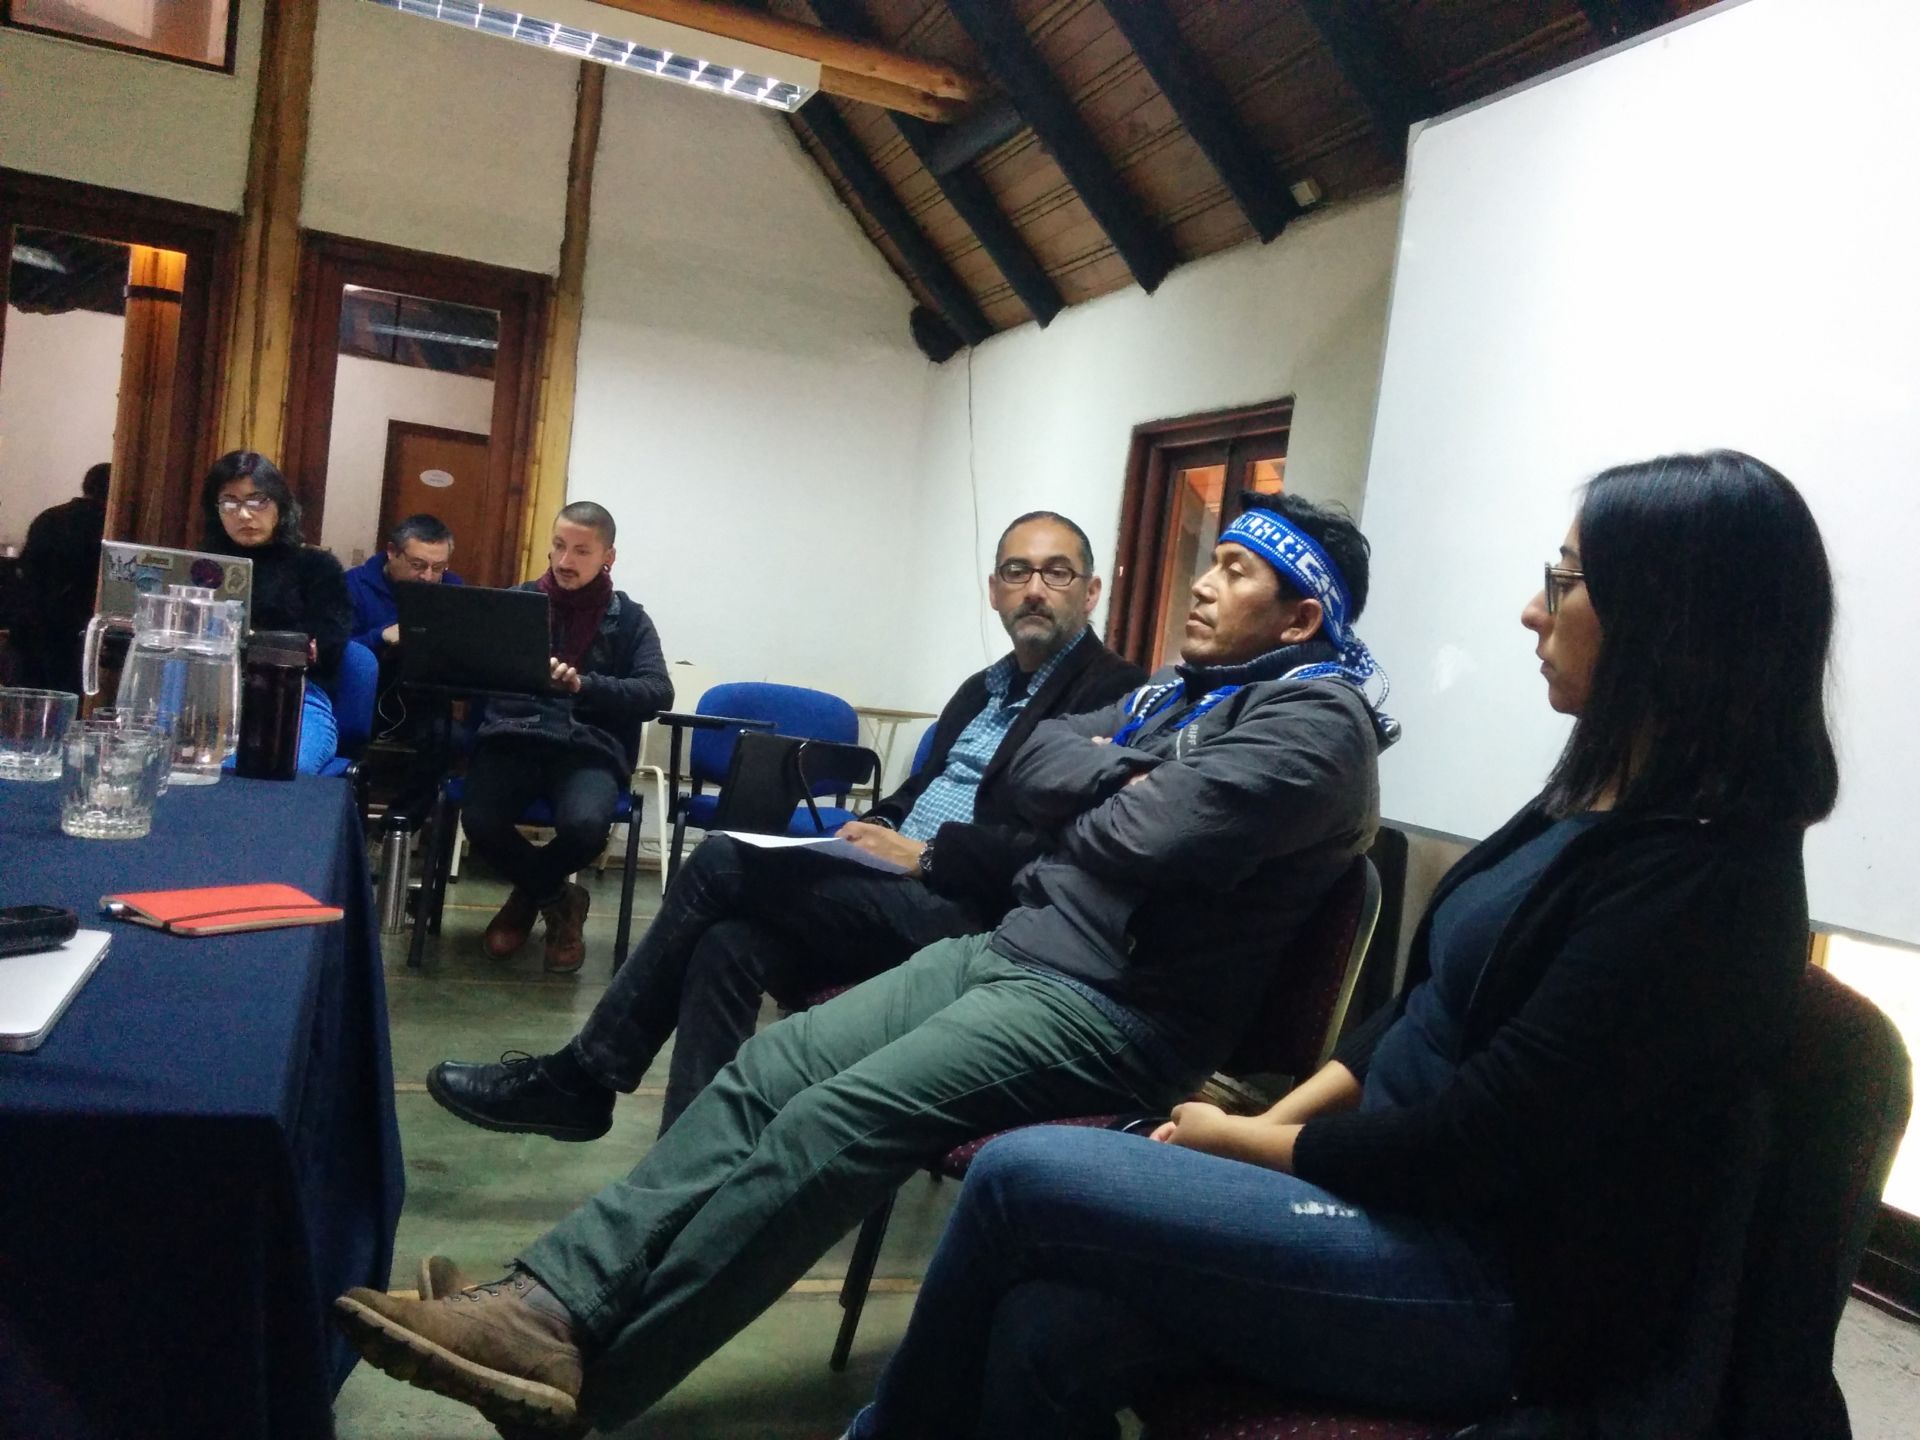 Panel discussing Mapuche